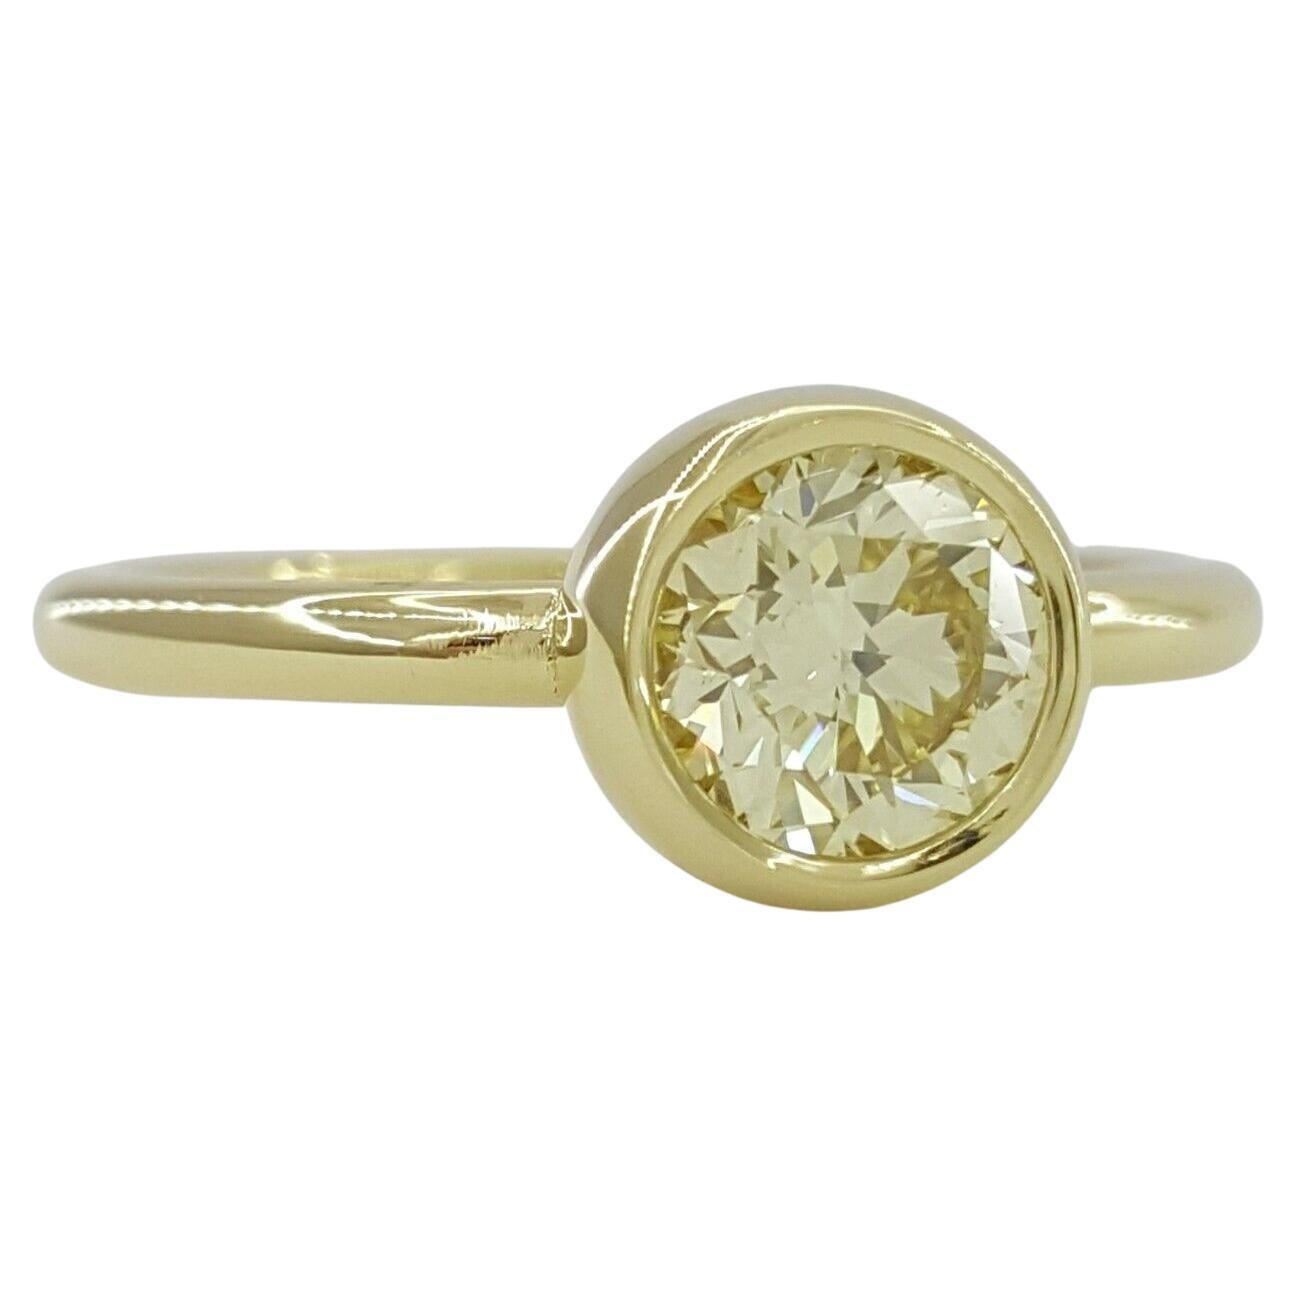 Yellow Gold Bezel Set Fancy Light Yellow Round Brilliant Cut Diamond Engagement Ring.



The ring weighs 4 grams, size 6, the center stone is a Natural Fancy Light Yellow Round Brilliant Cut diamond weighing ~ 0.75 ct, Even Fancy Light in color, SI1